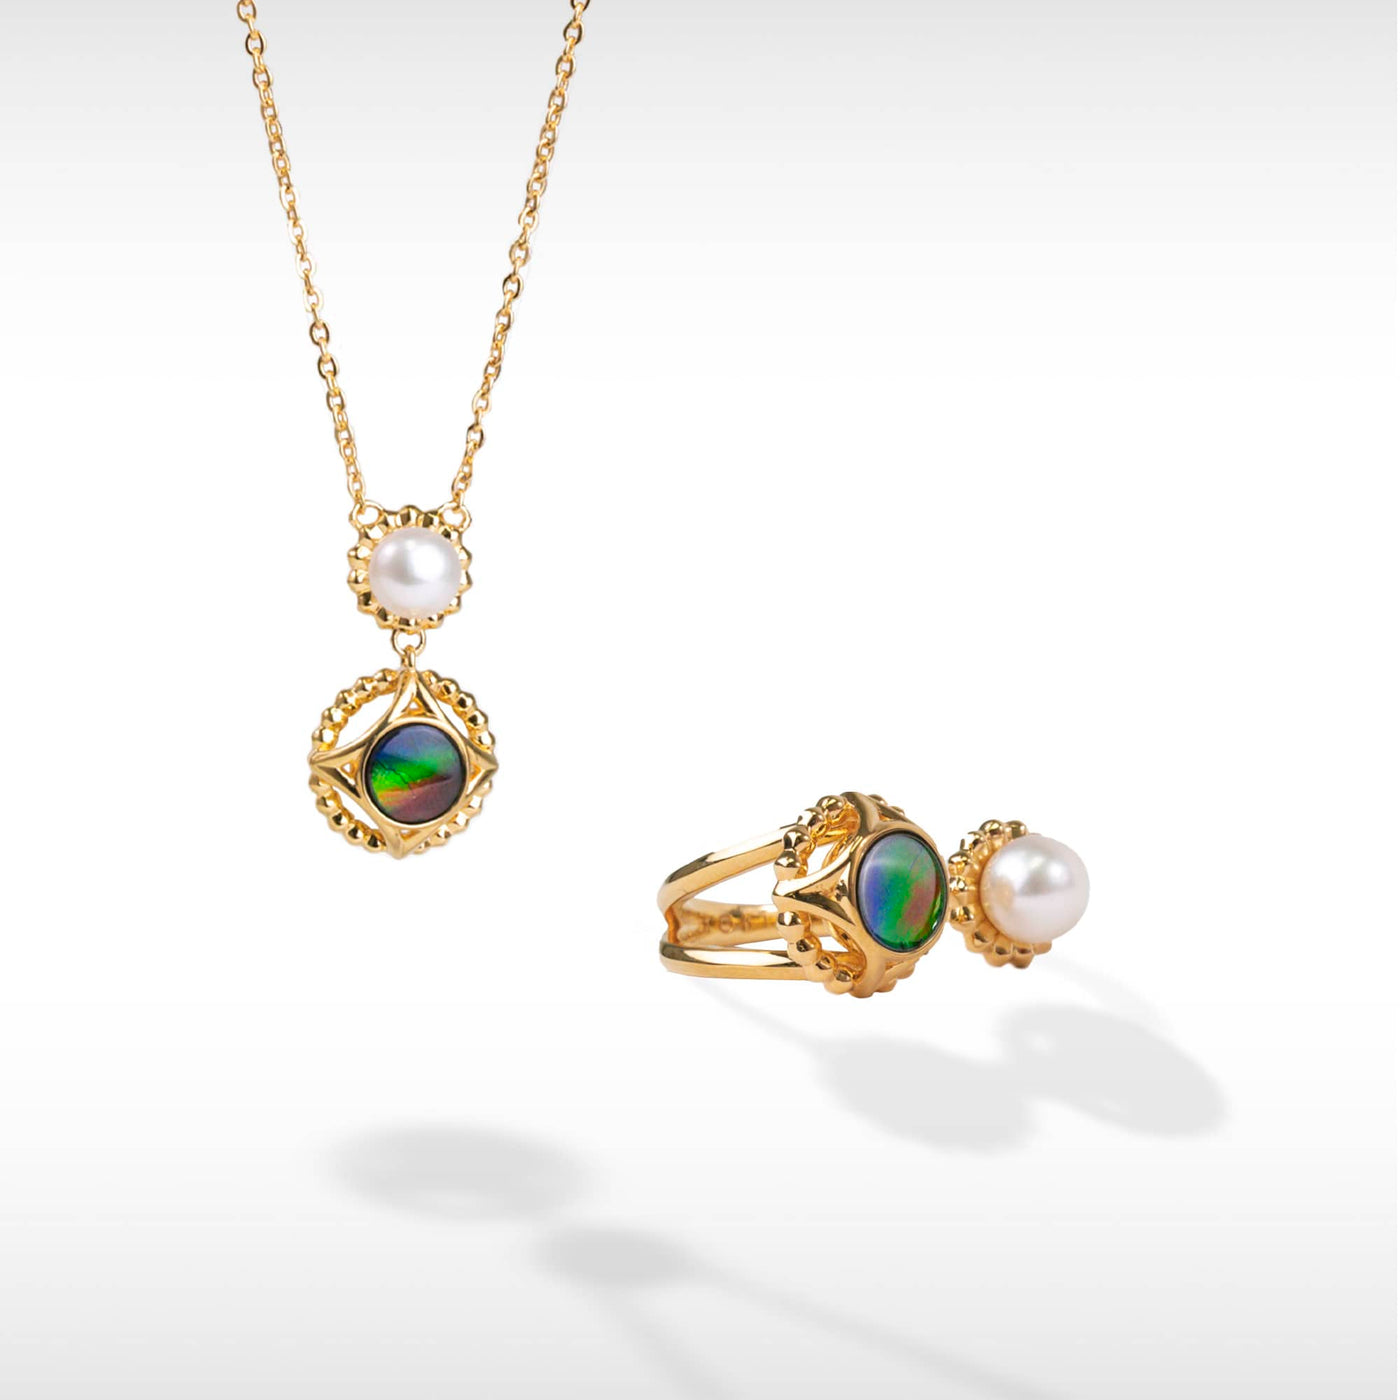 Pearl ammolite pendant and ring set in 18K gold plating